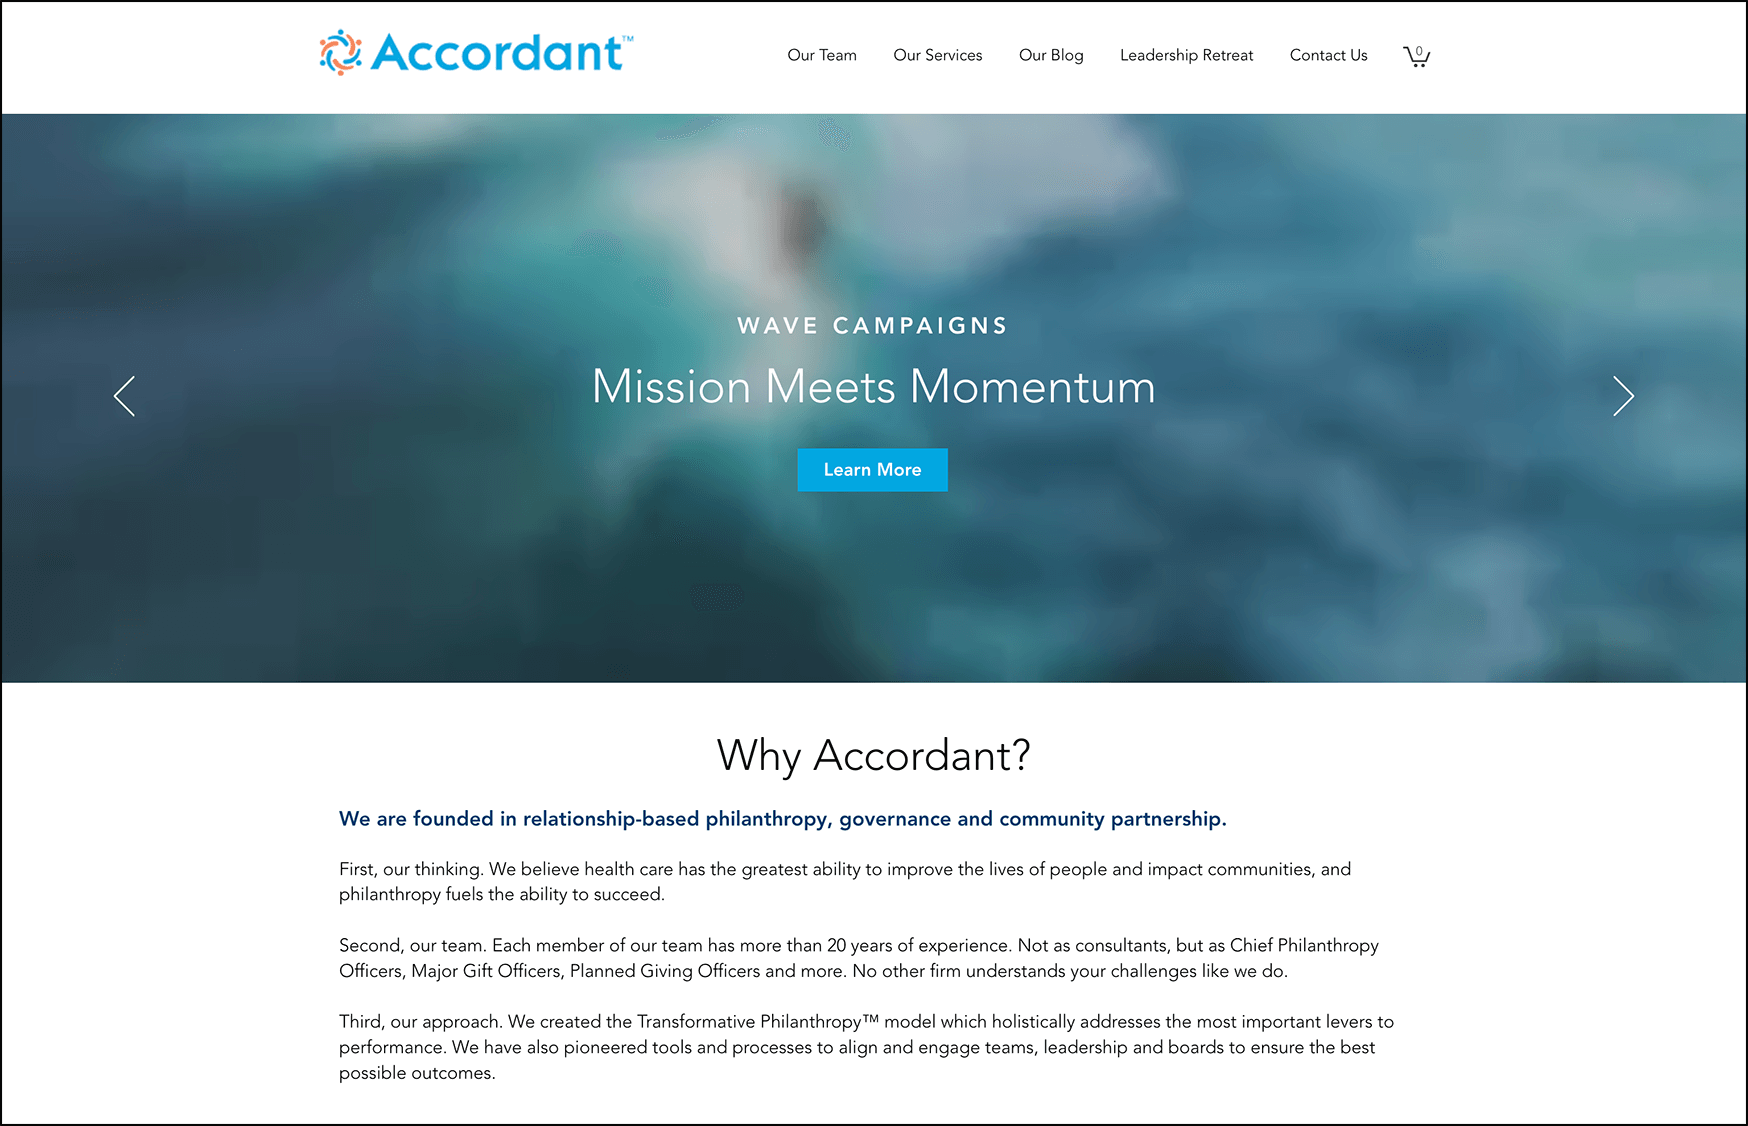 Accordant is a top fundraising consulting firm.